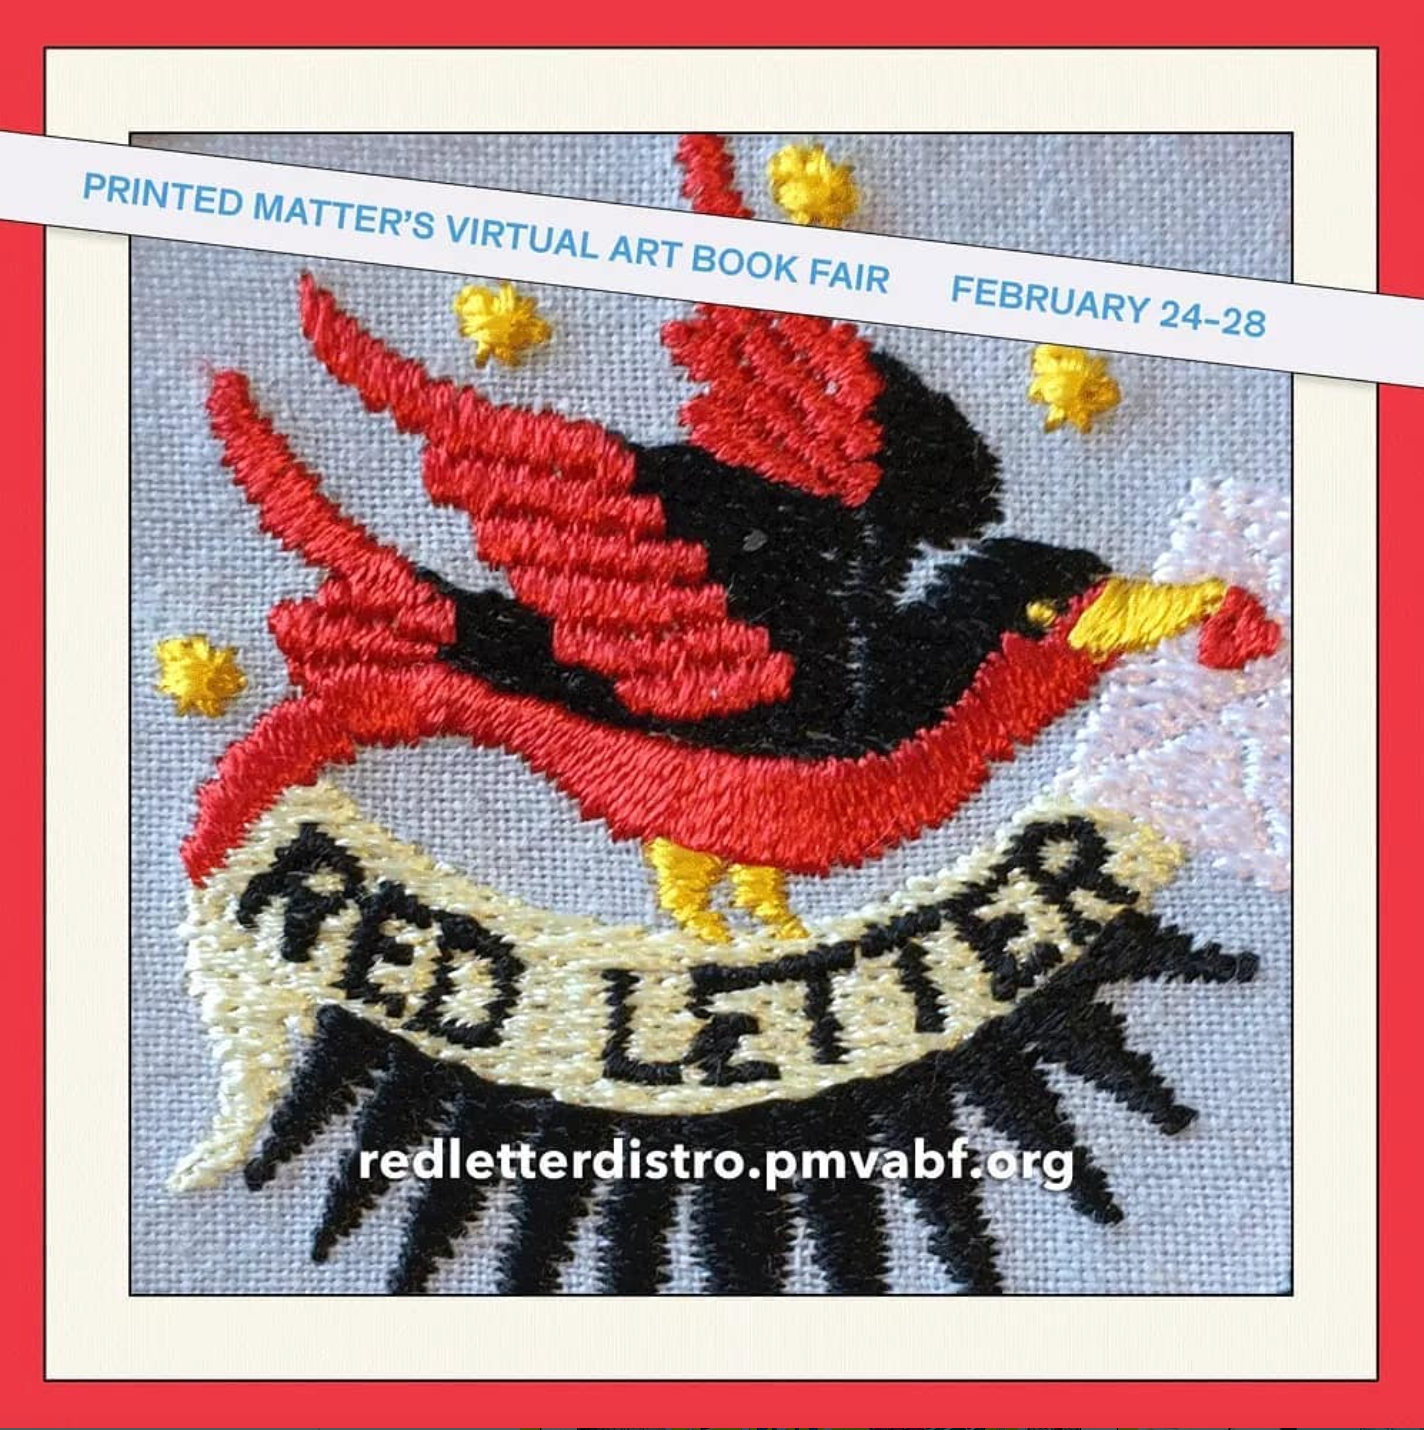 An embroidered bird with the words "Red Letter" stitched below and a text banner above announcing the Printed Matter Virtual Art Book Fair    